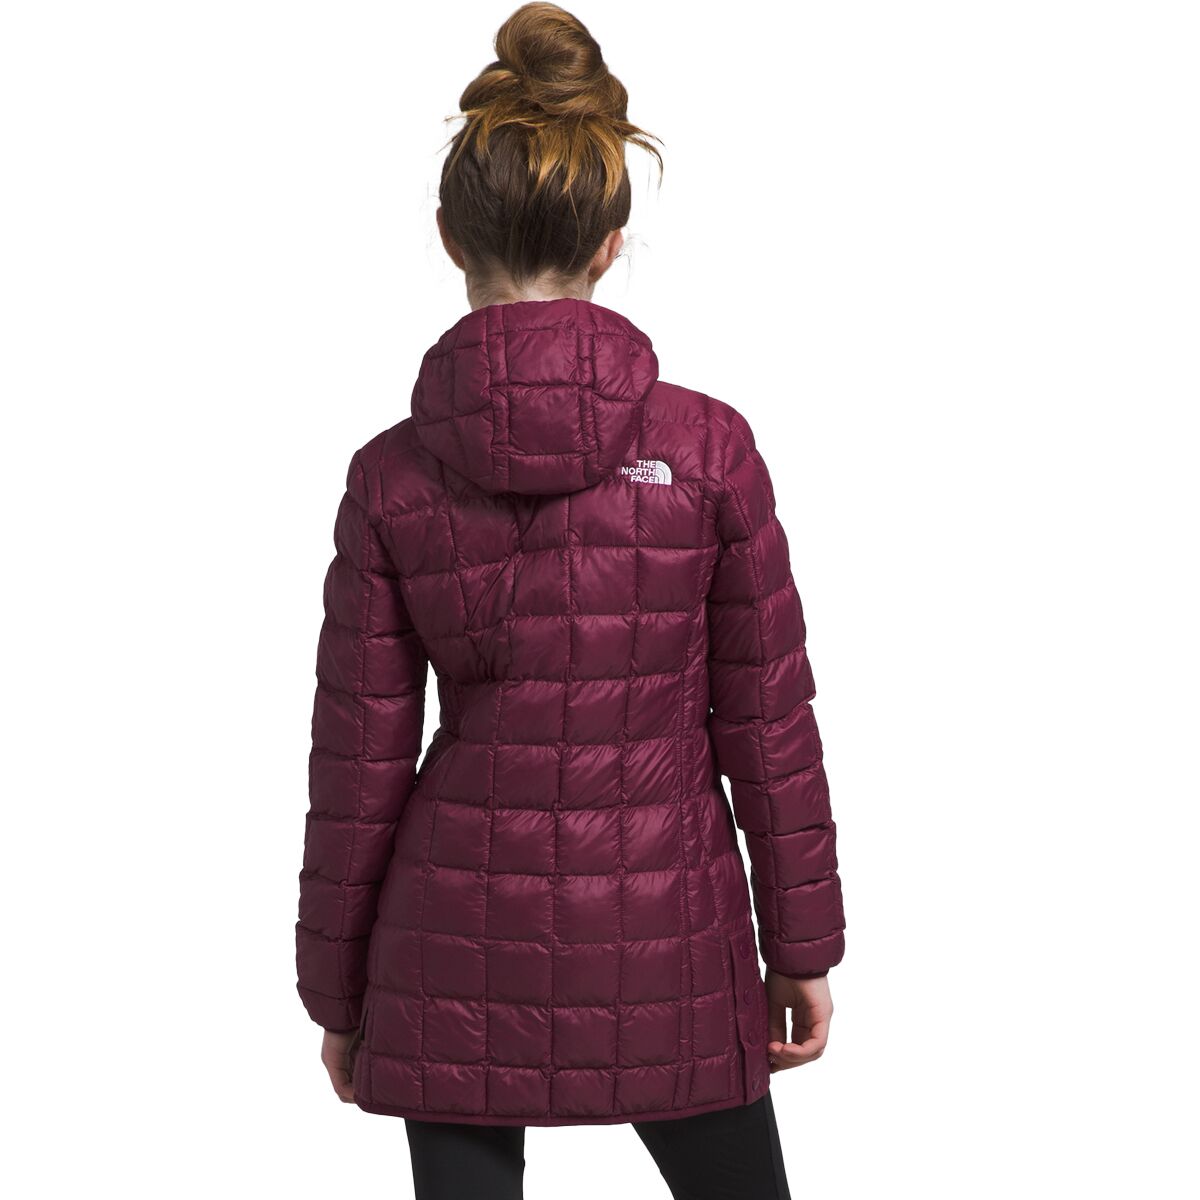 The North Face Thermoball Parka - Girls' - Kids